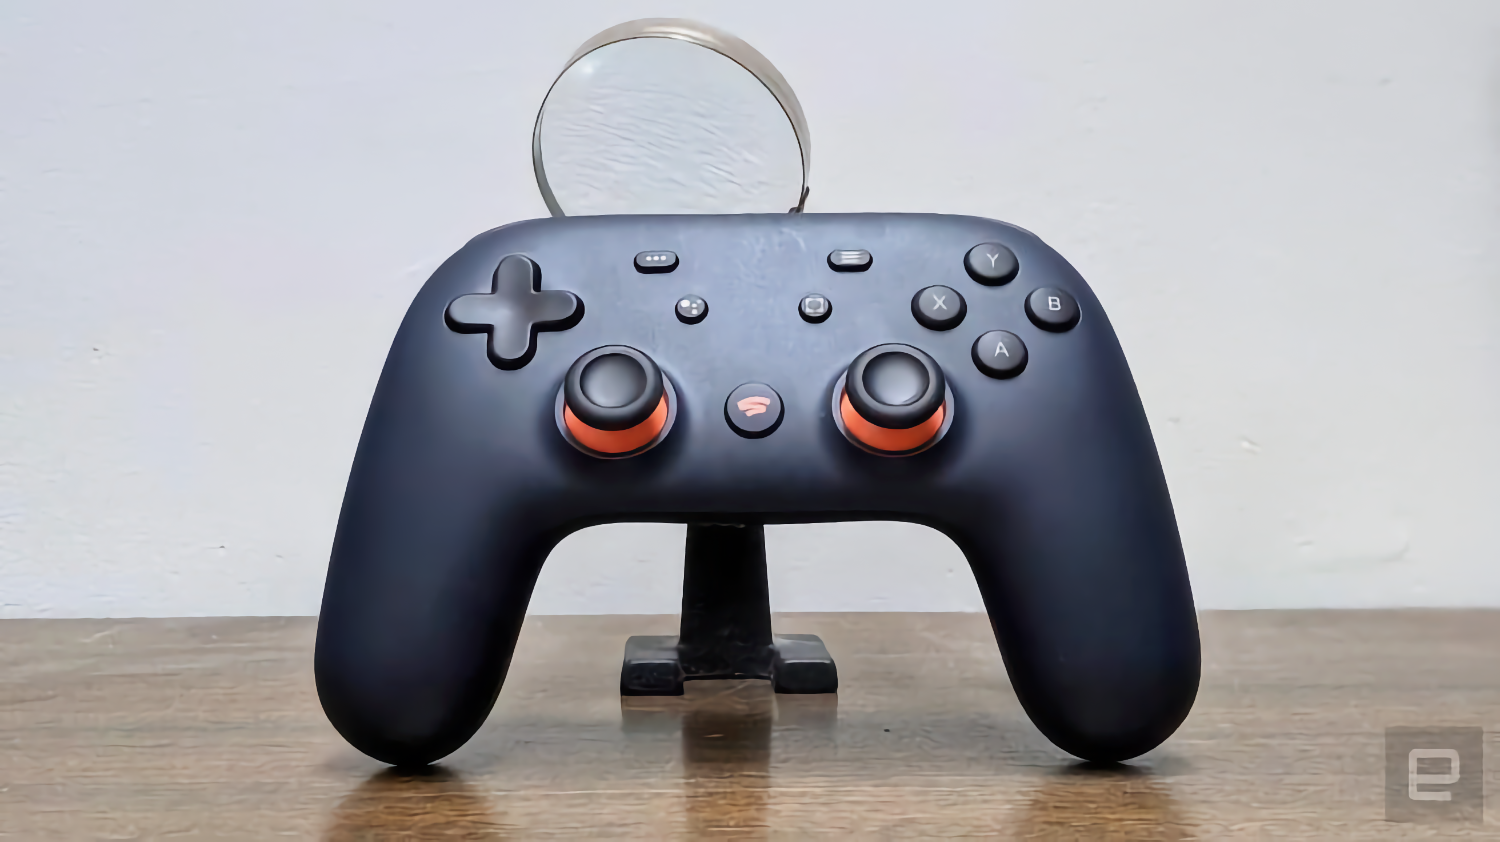 Stadia users can now unlock their controller’s Bluetooth